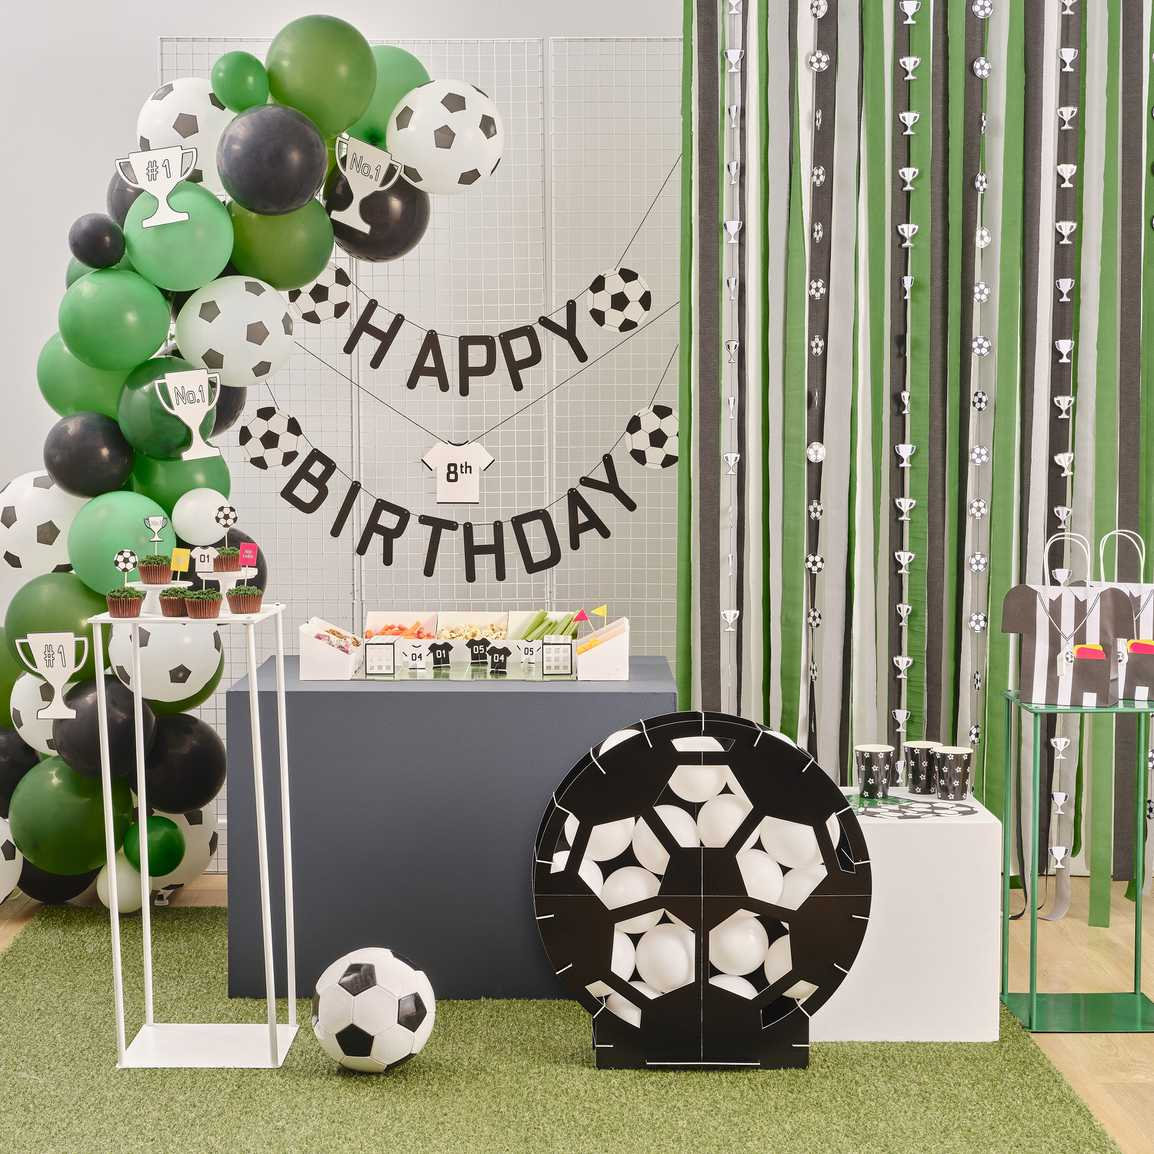 Soccer Photo Booth Props Package. Soccer Match Accessories. Team Birthday  Party Games Decorations. Printable Photocall Accessories 